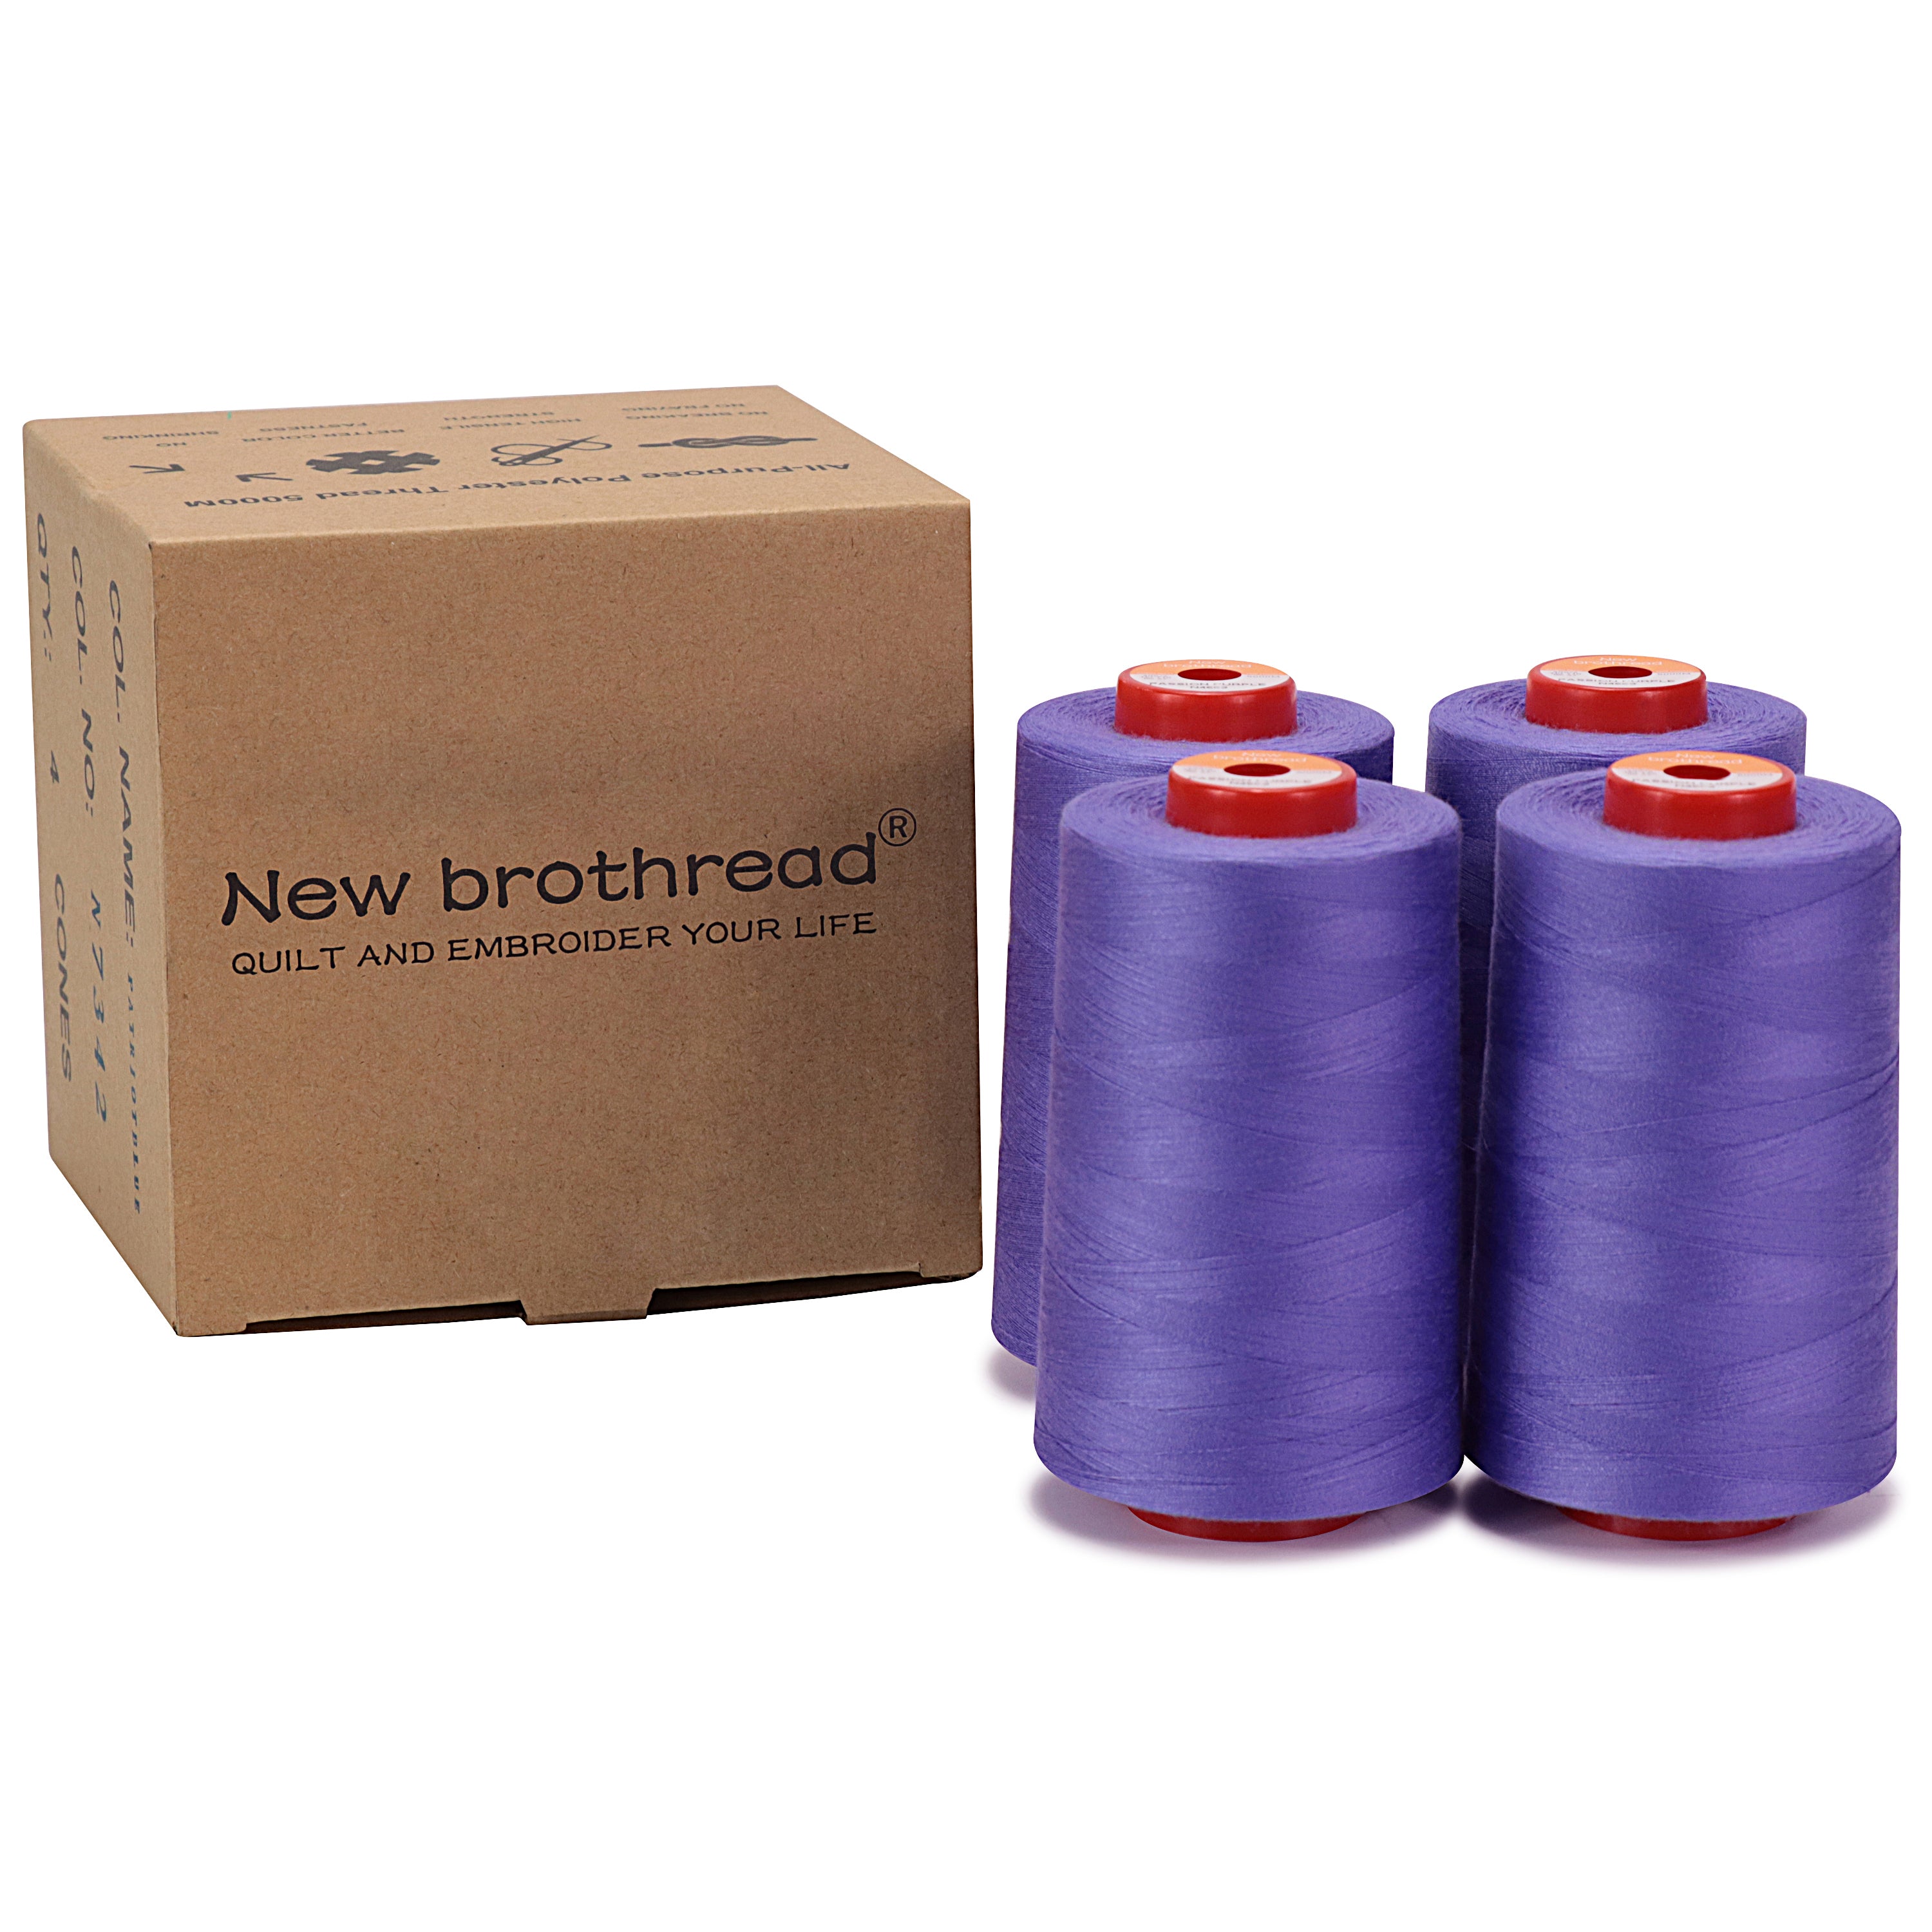 30 Options - Large Cones of 5500Y (5000M) Each - New brothread